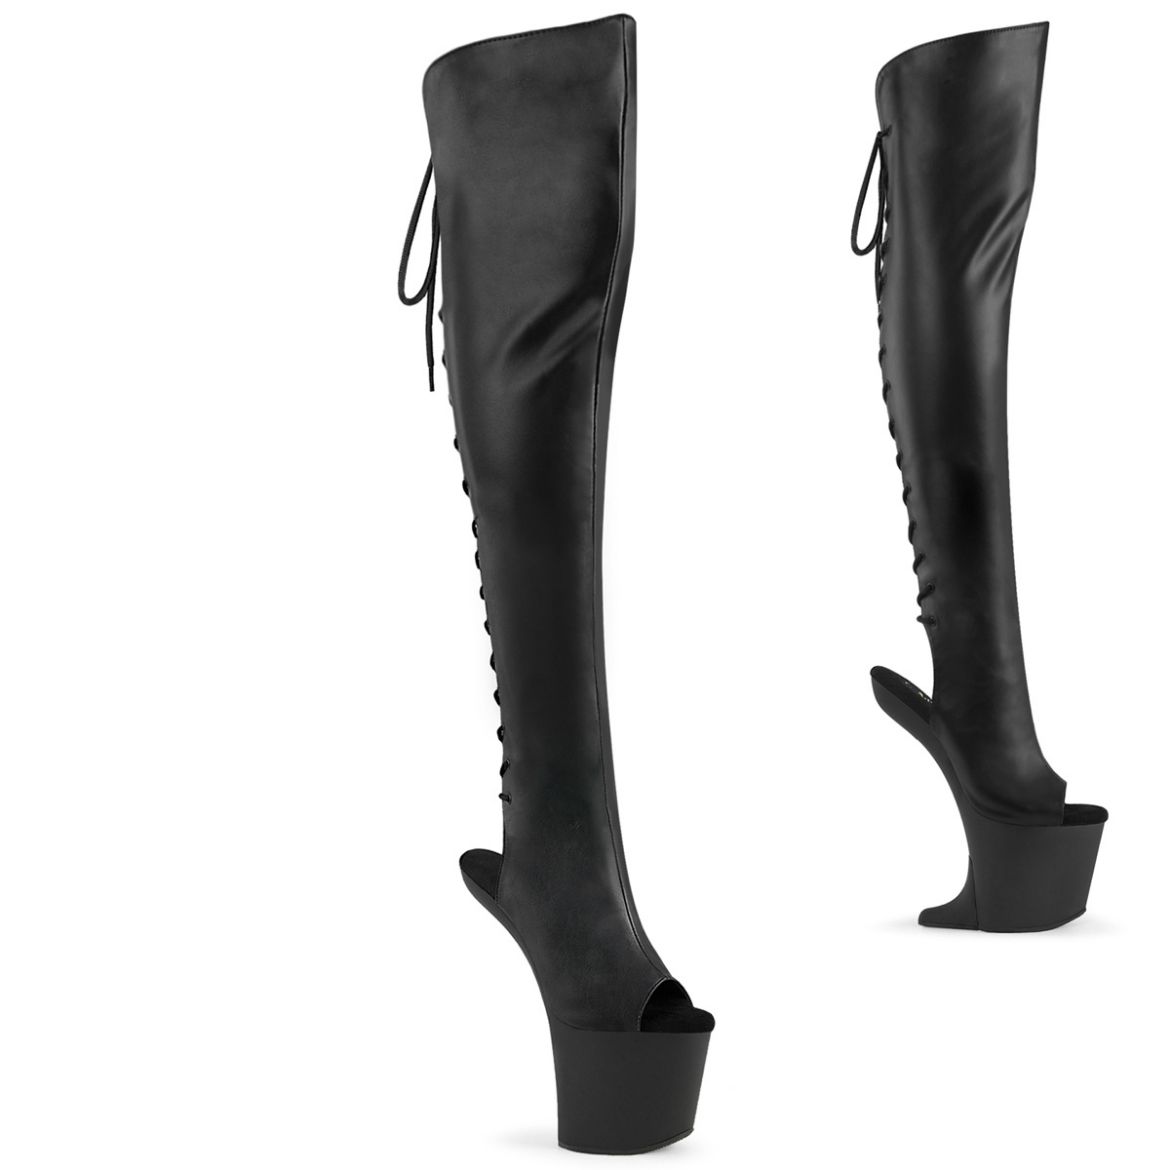 Product image of Pleaser CRAZE-3019 Blk Faux Leather/Blk Matte 8 Inch Heelless 3 Inch PF Open Toe/Over-The-Knee Boot Side Zip